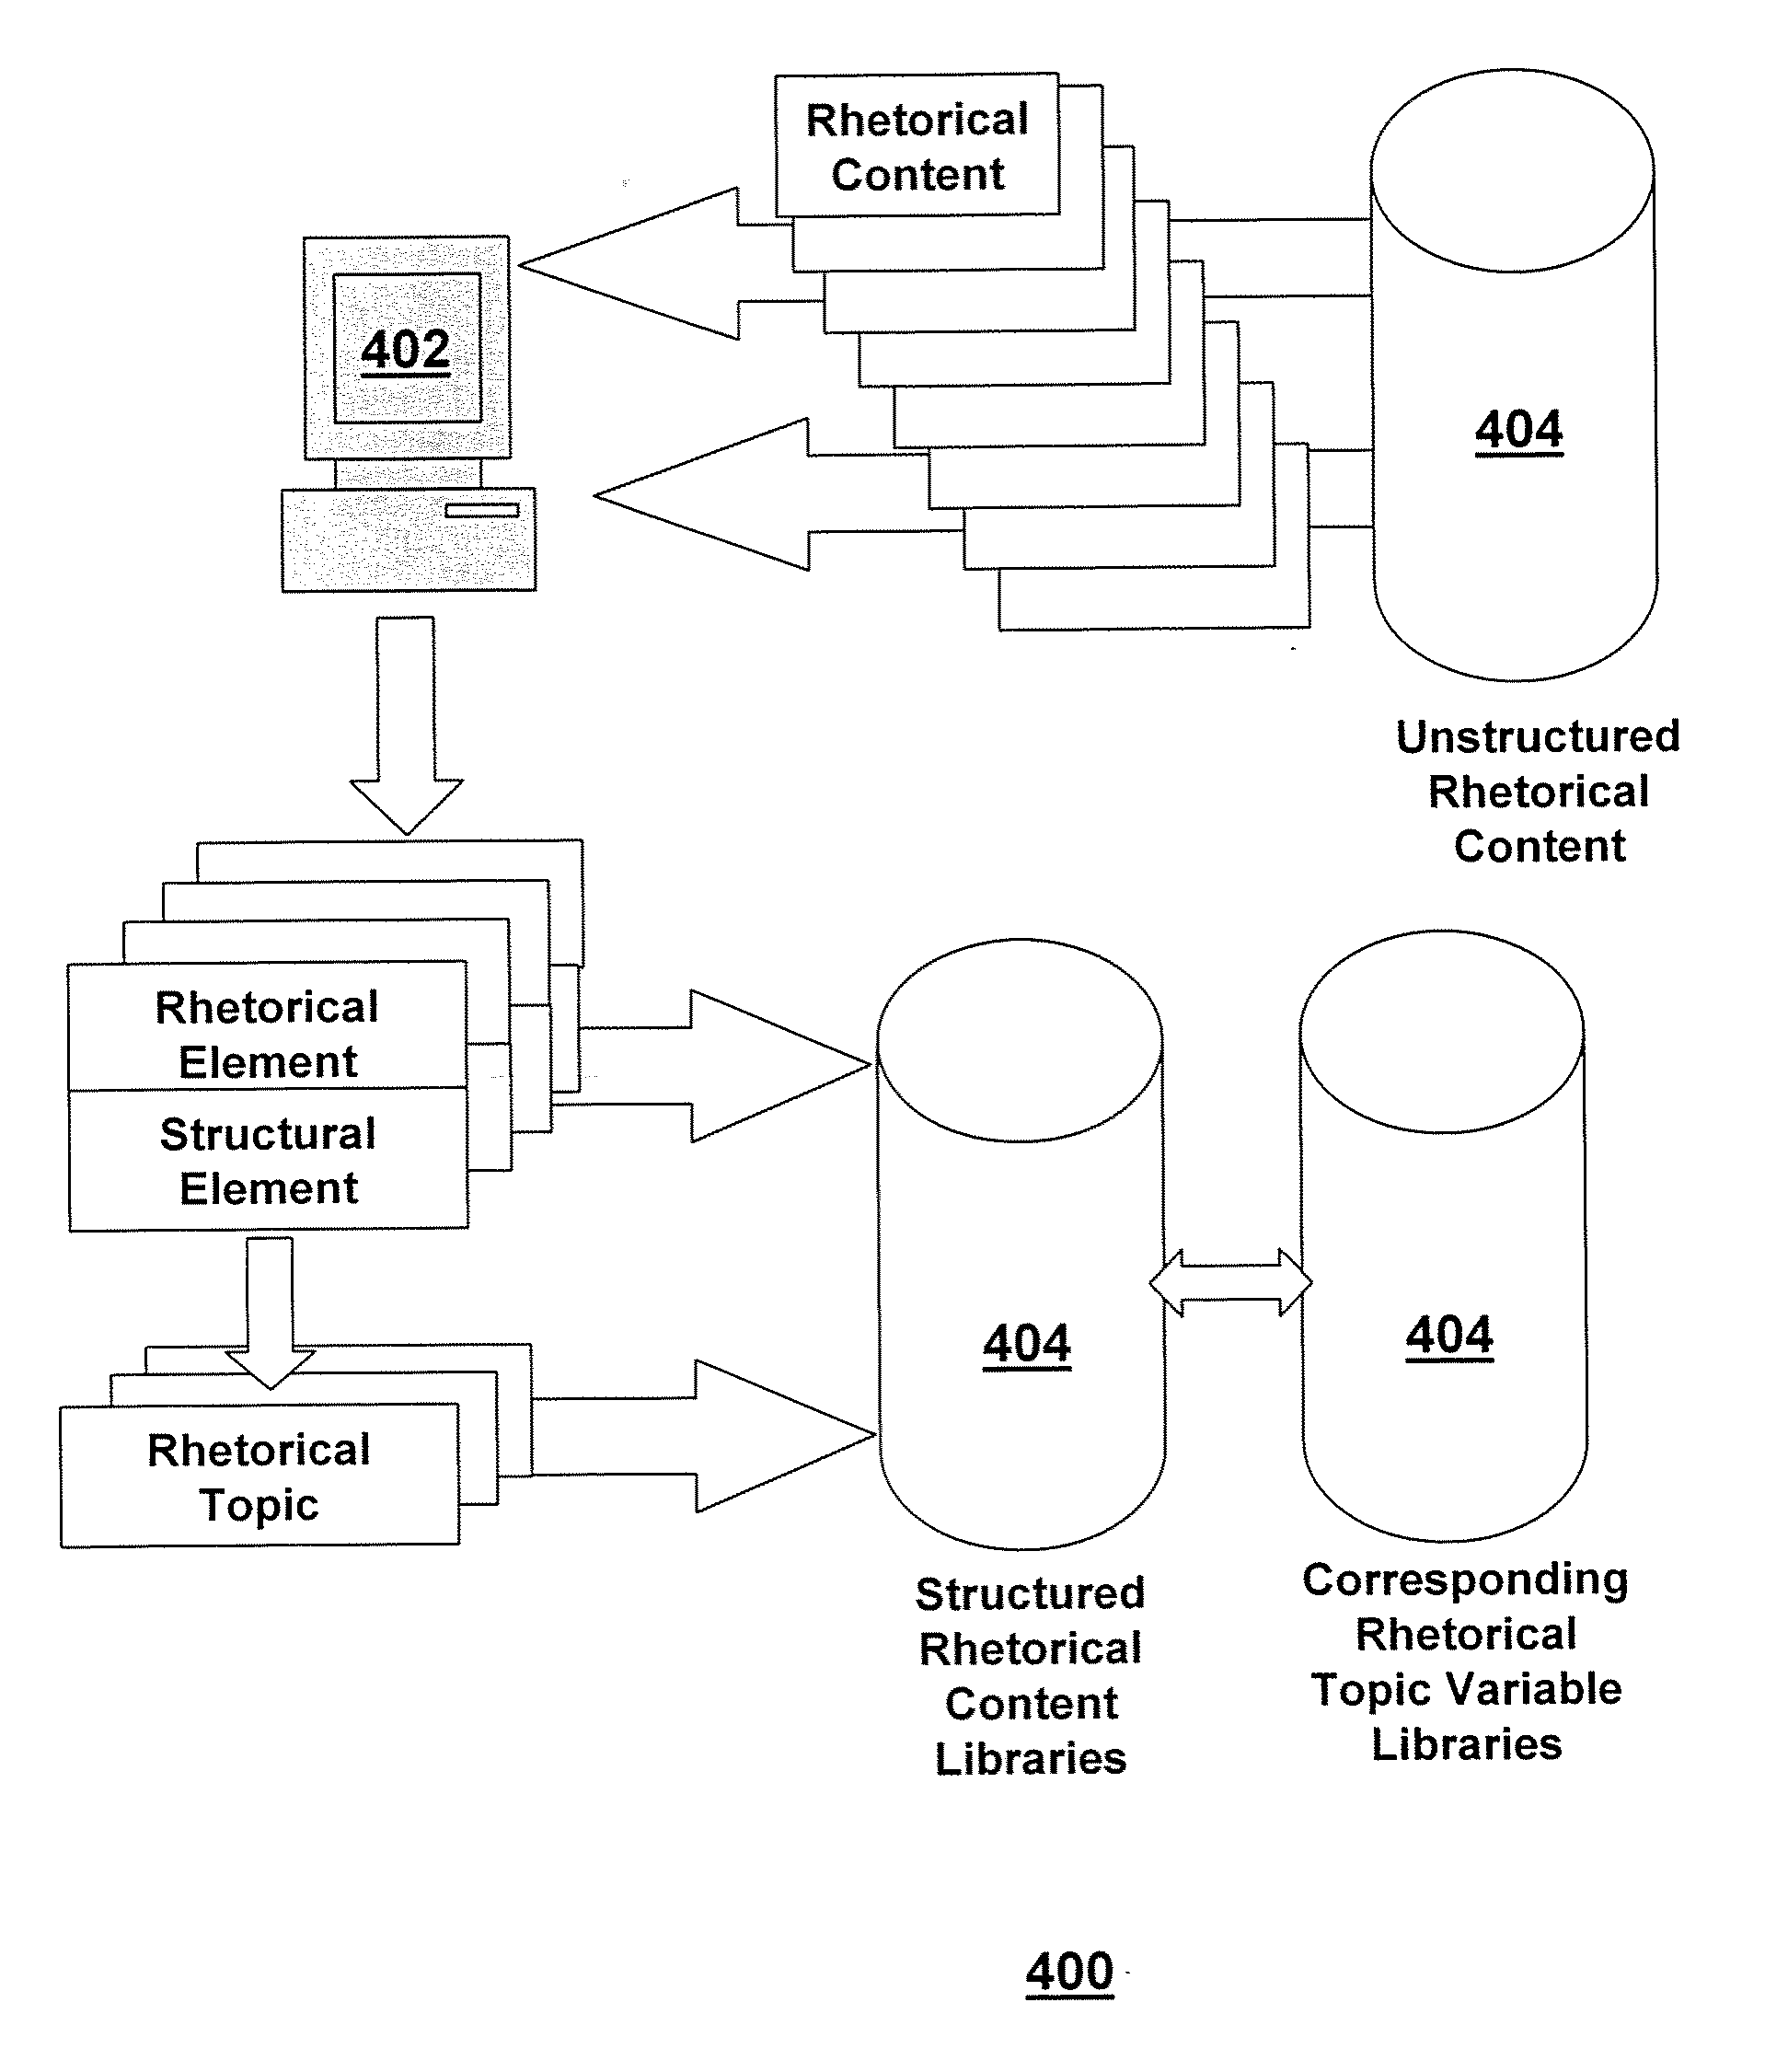 Method and apparatus for analyzing rhetorical content